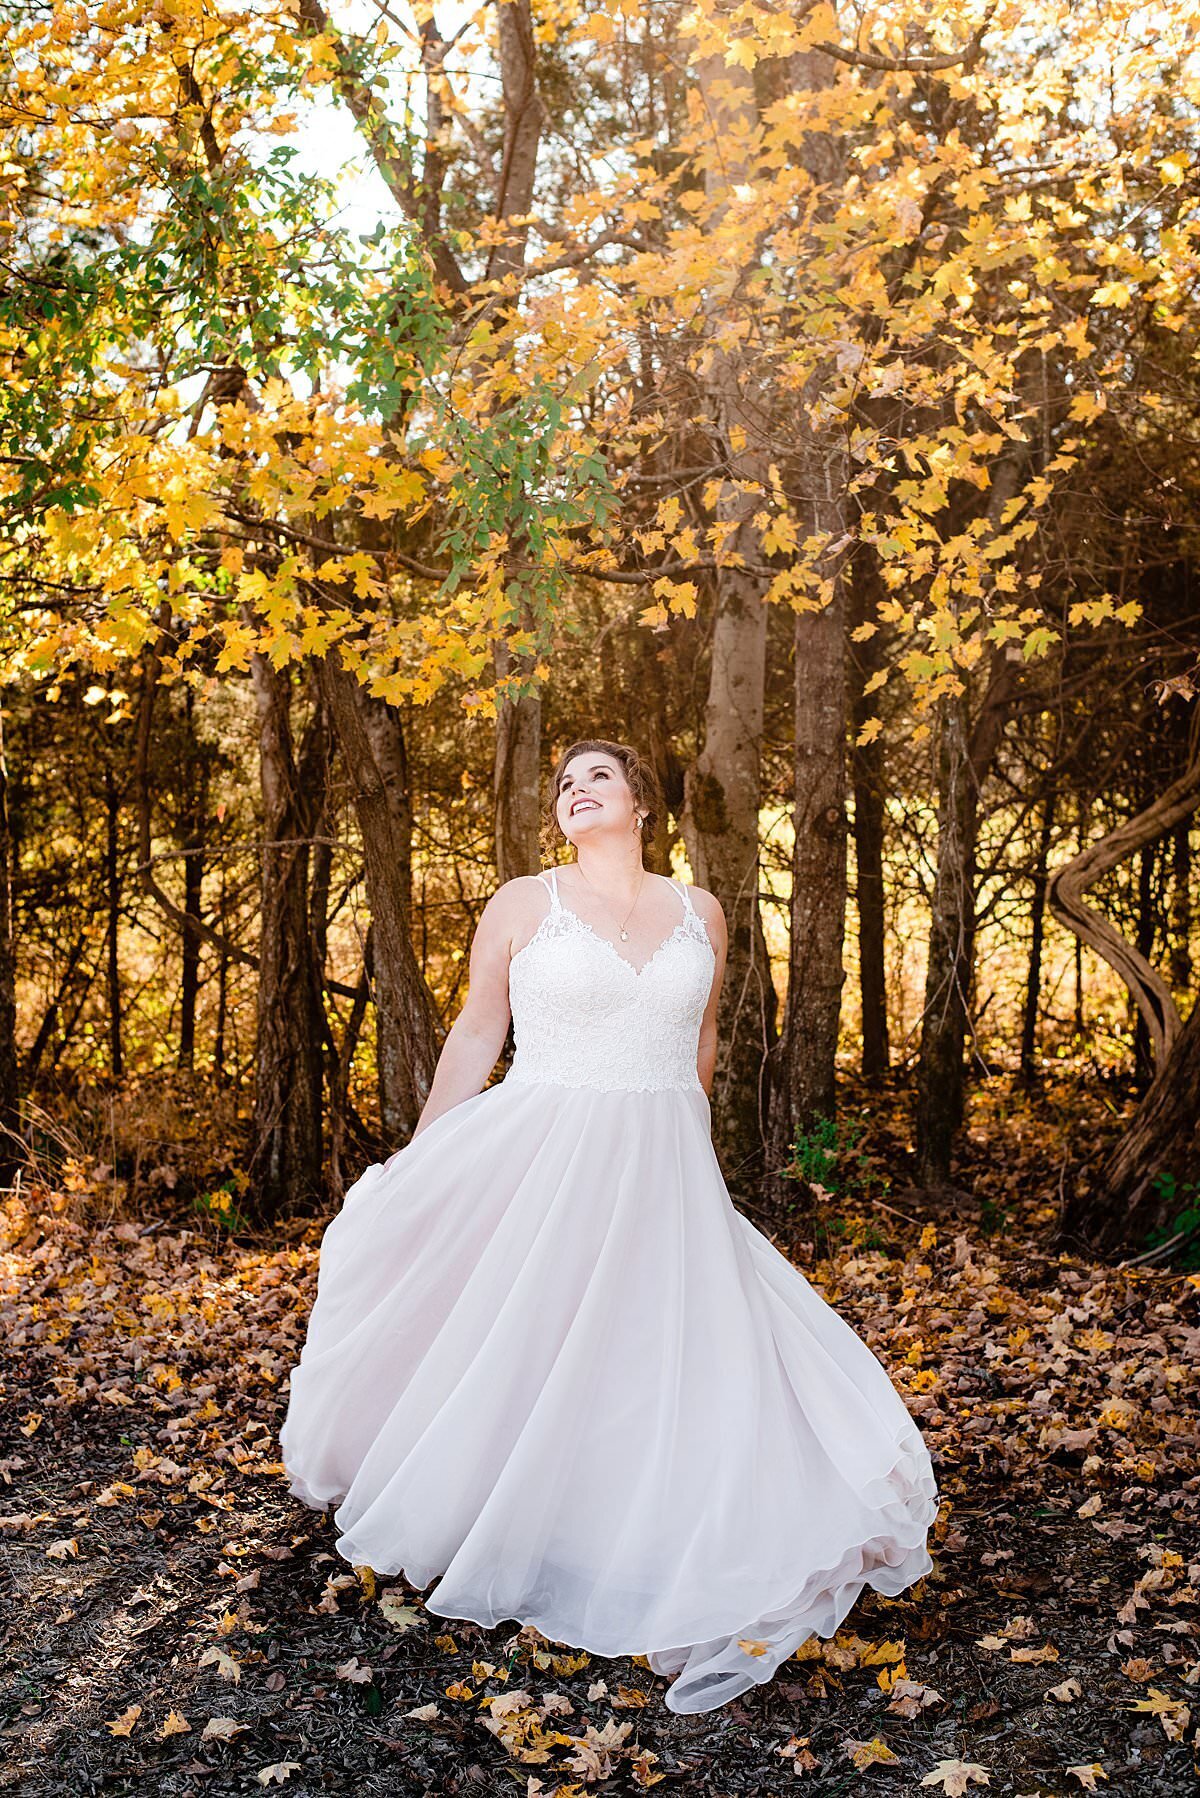 Bride spinning under falling golden colored leaves wearing a ballgown with thin straps and deep neckline